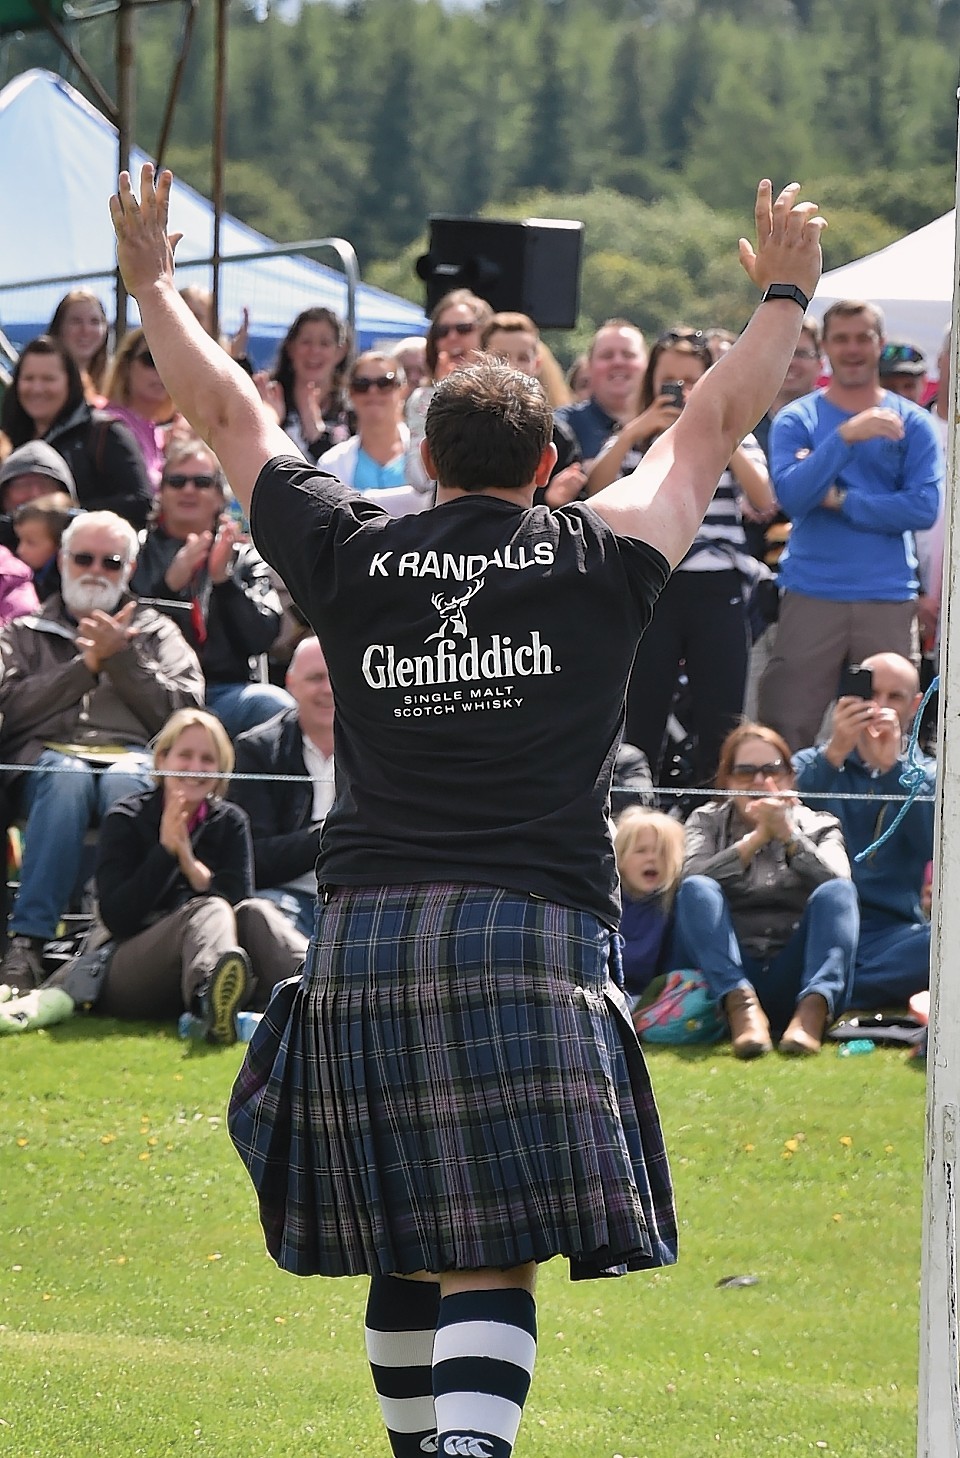 Aboyne Highland Games - Weight over bar - record was broken by Kyle Randall with a throw of 17ft 3in. (previous record was 17ft 2in). Picture by Colin Rennie